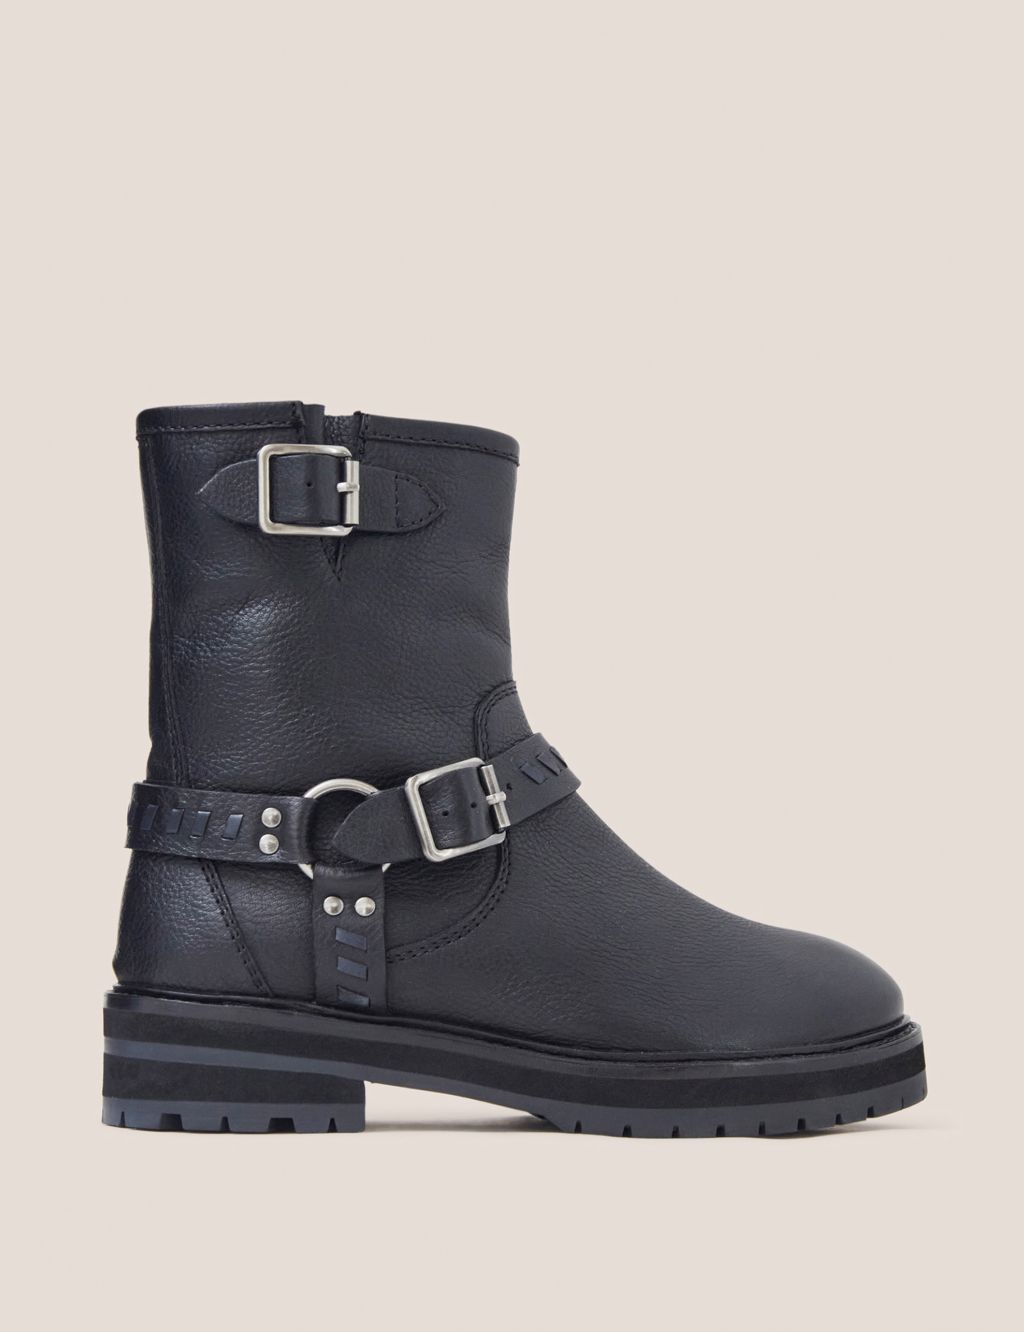 Leather Biker Buckle Flat Boots image 1